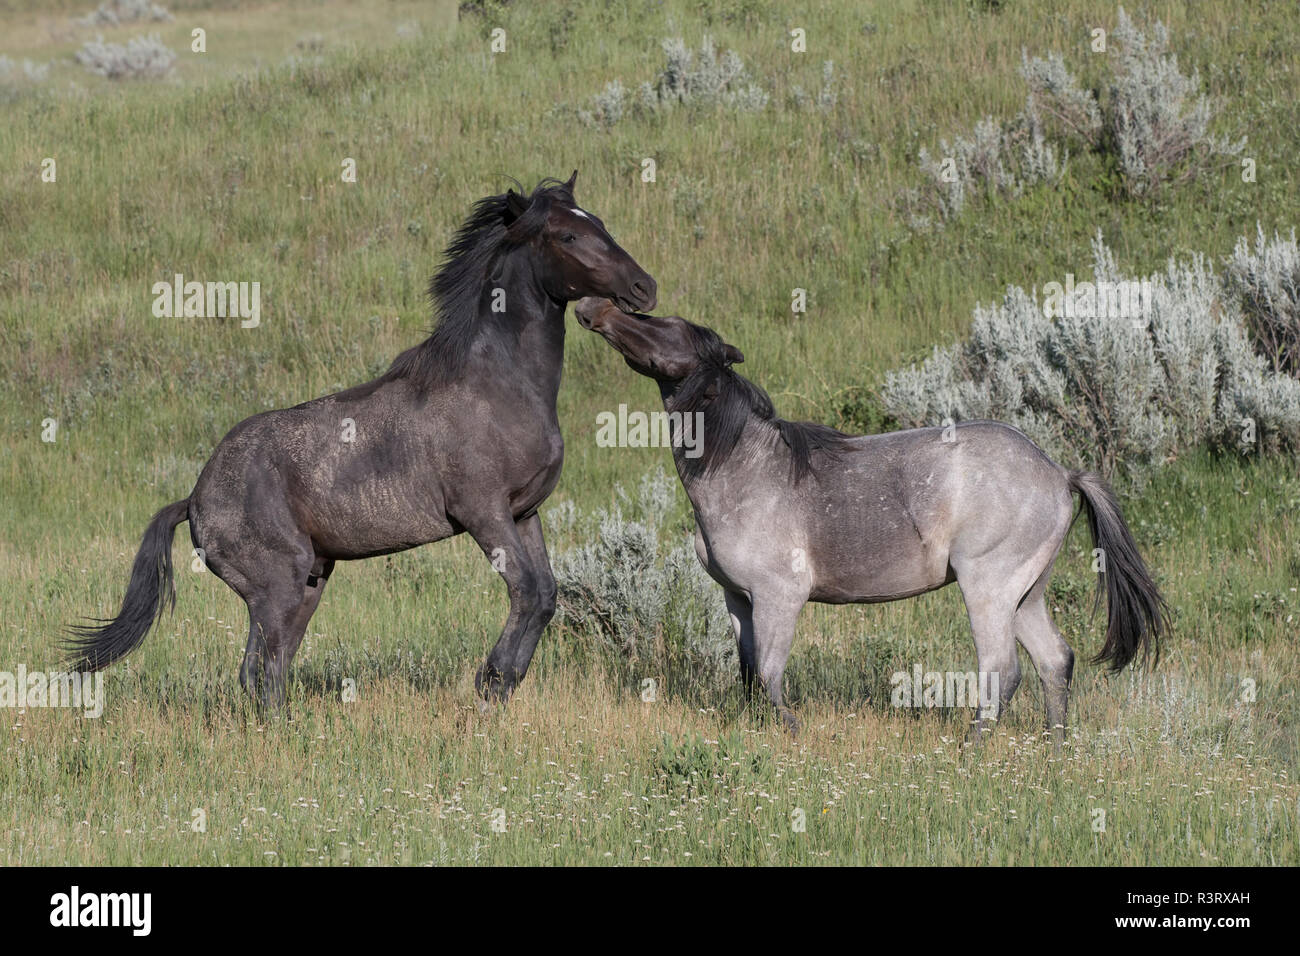 Feral (Wild) Horses, Stallions fighting, Theodore Roosevelt National Park Stock Photo